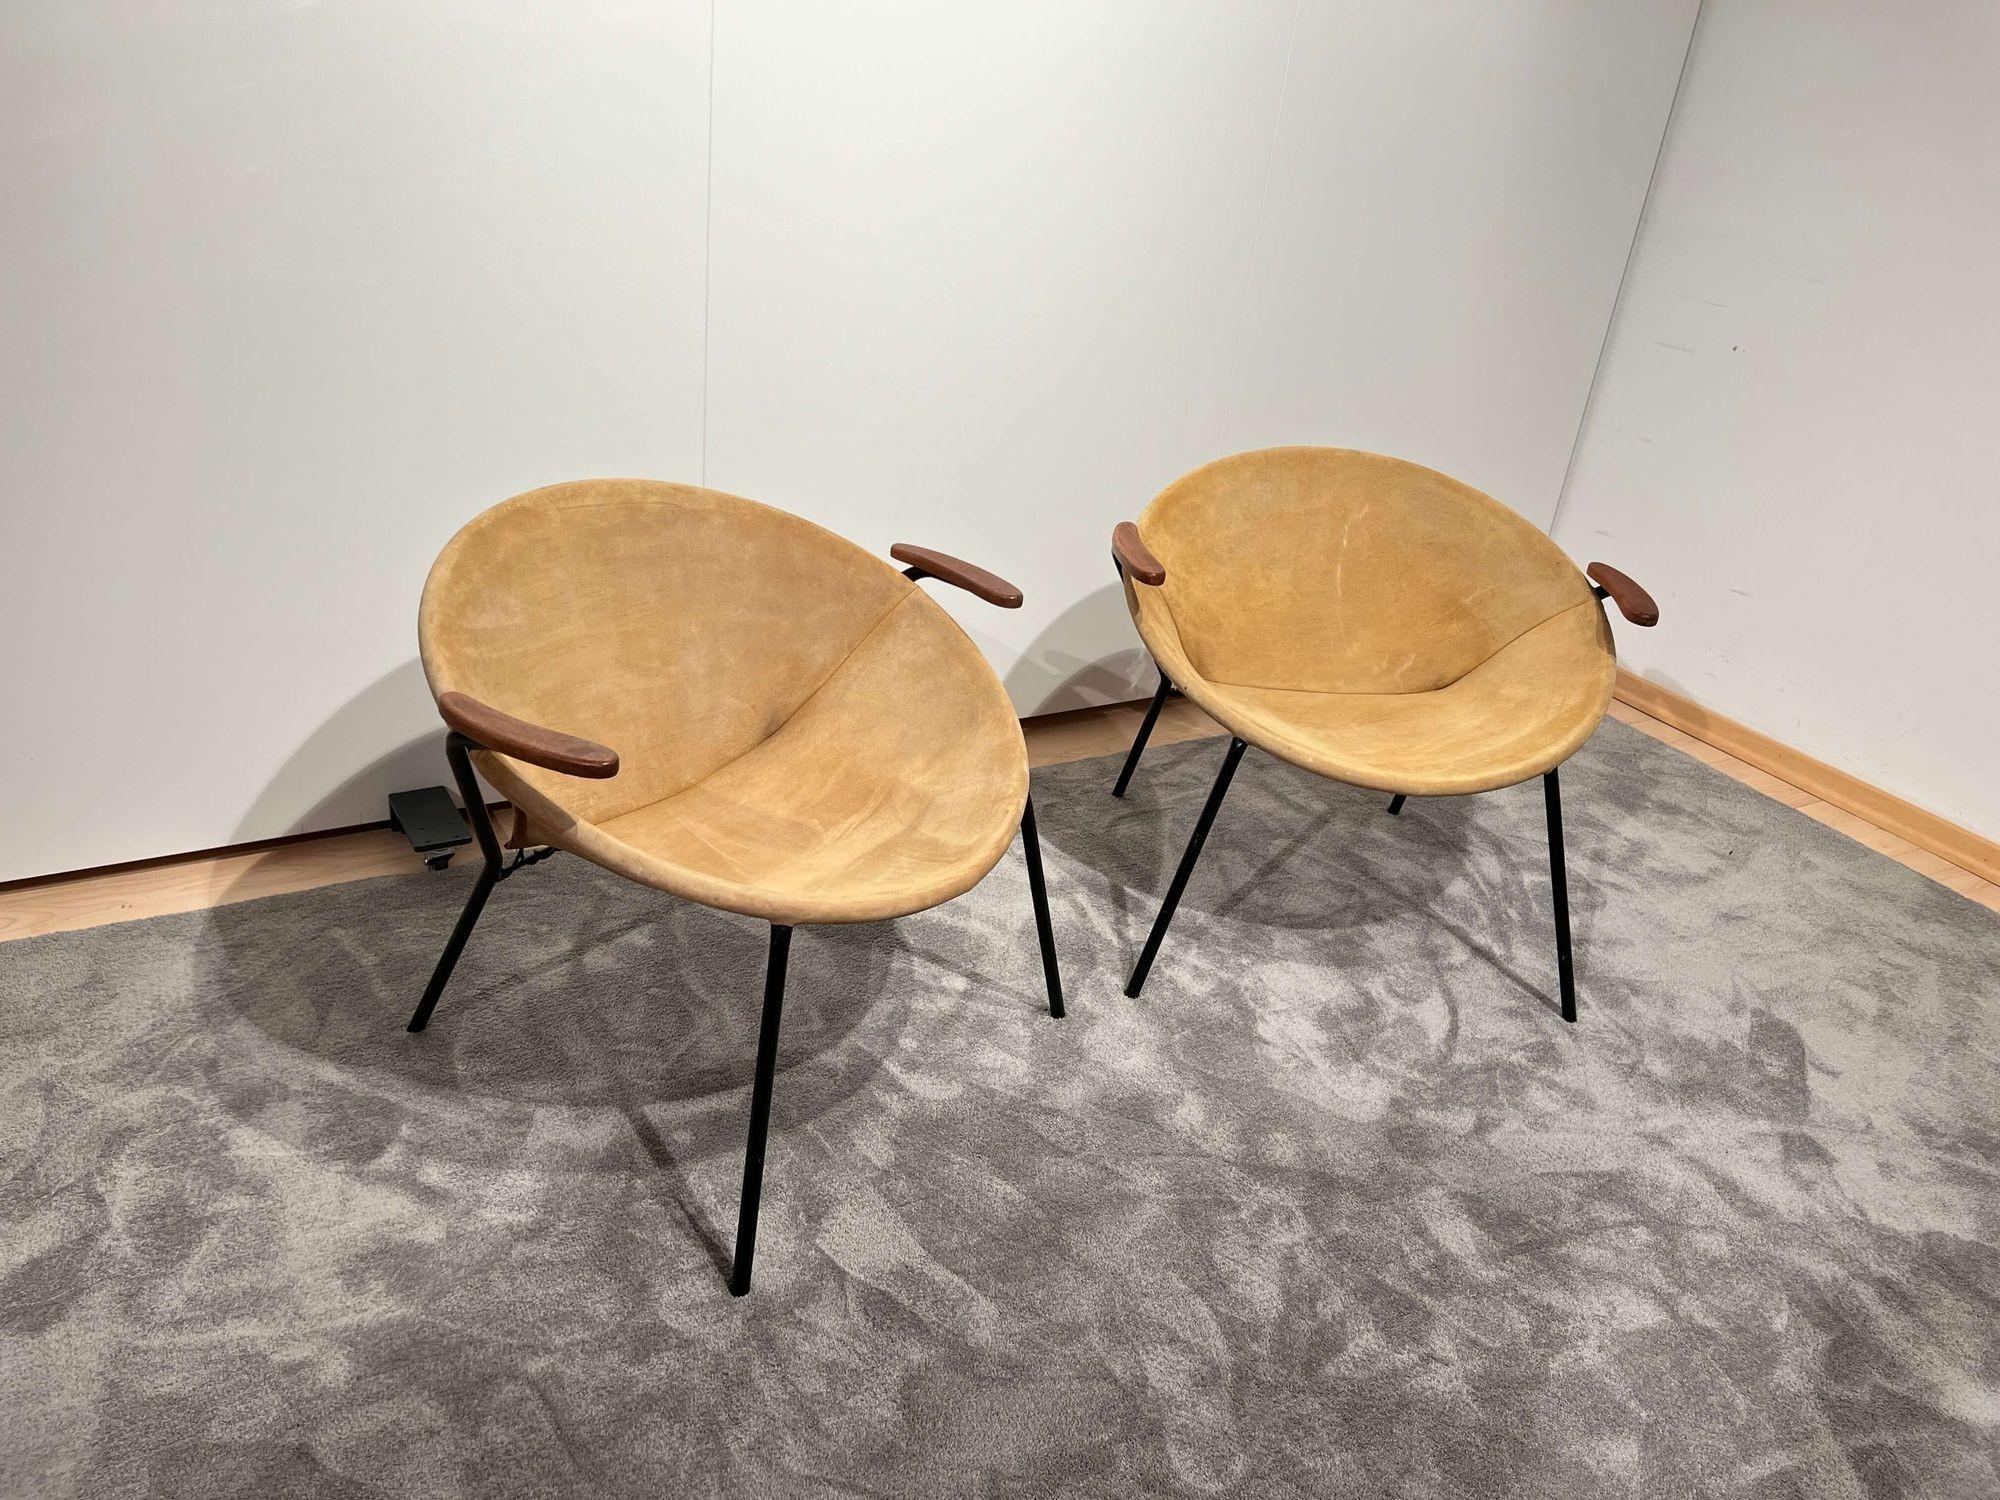 Pair of 1960s ‚Balloon’ lounge chairs (2) by Hans Olsen (Design 1955). Original yellow suede leather. Black lacquered metal frame. Oiled solid teak armrests.
Dimensions: H 64 cm x W 76 cm x D 63 cm x Seat-H ca. 37 cm.